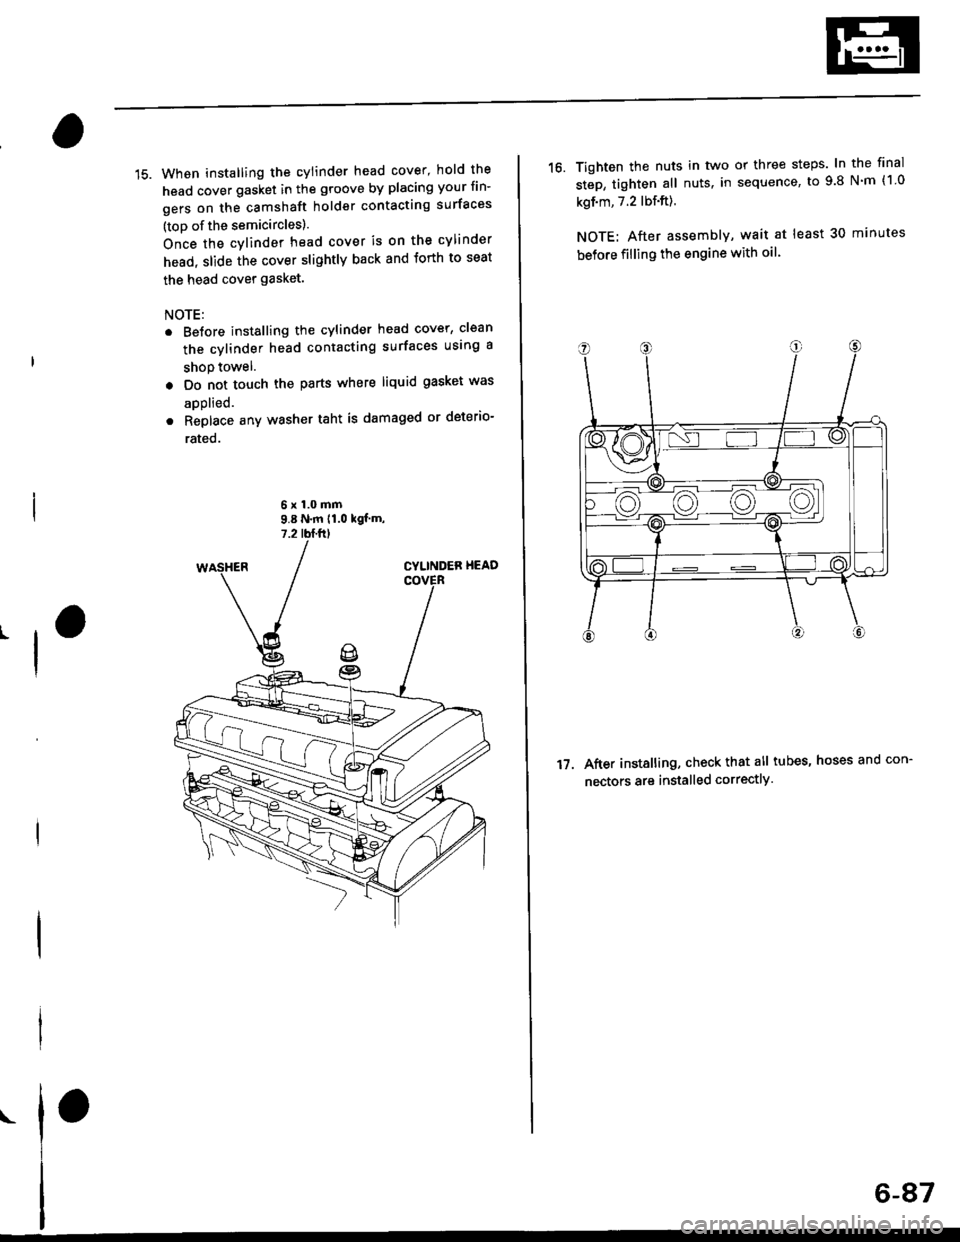 HONDA CIVIC 1999 6.G Service Manual 15. When installing the cylinder head cover, hold the
head cover gasket in the groove by placing your fin-
gers on the camshaft holder contacting surfaces
(toD of the semicircles).
Once the cylinder h